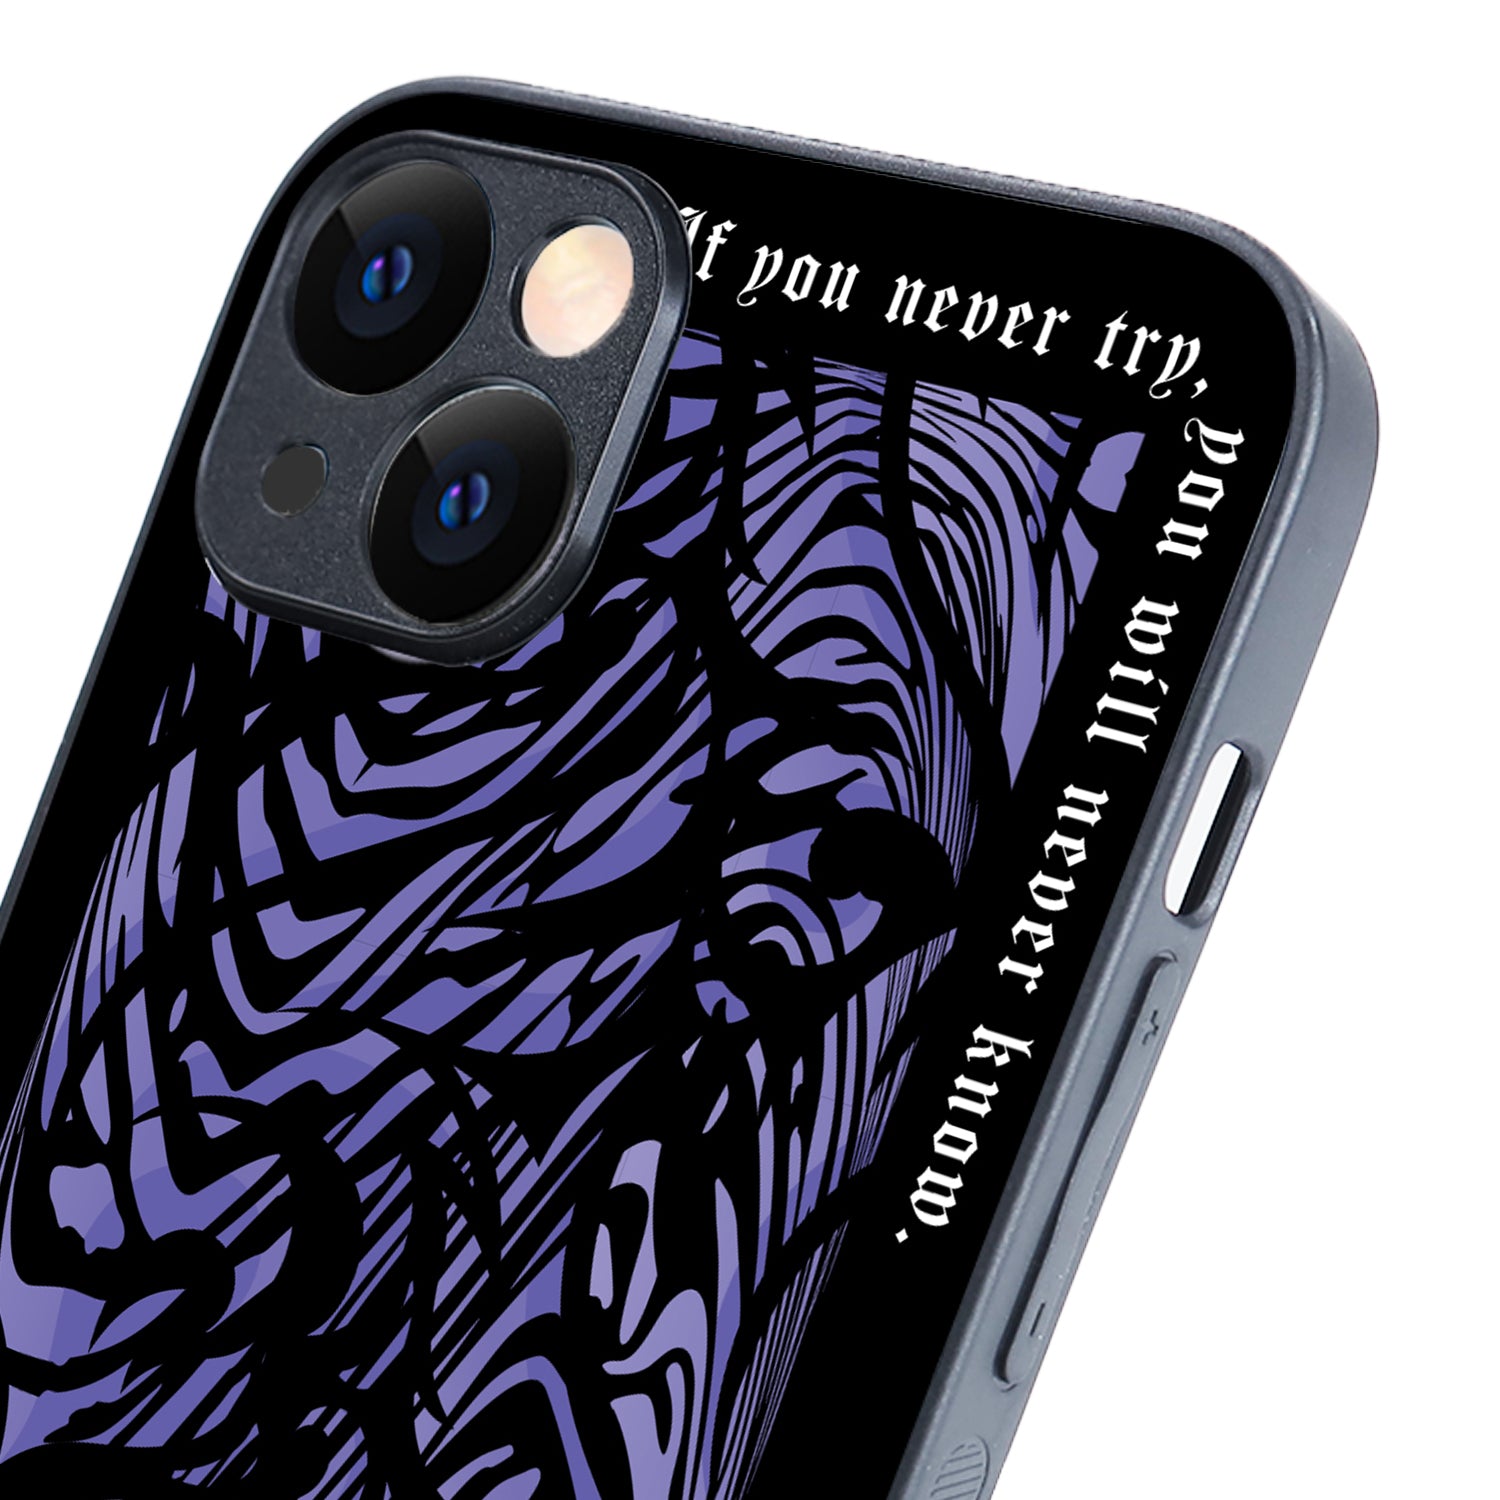 Keep On Pushing Quote iPhone 14 Plus Case